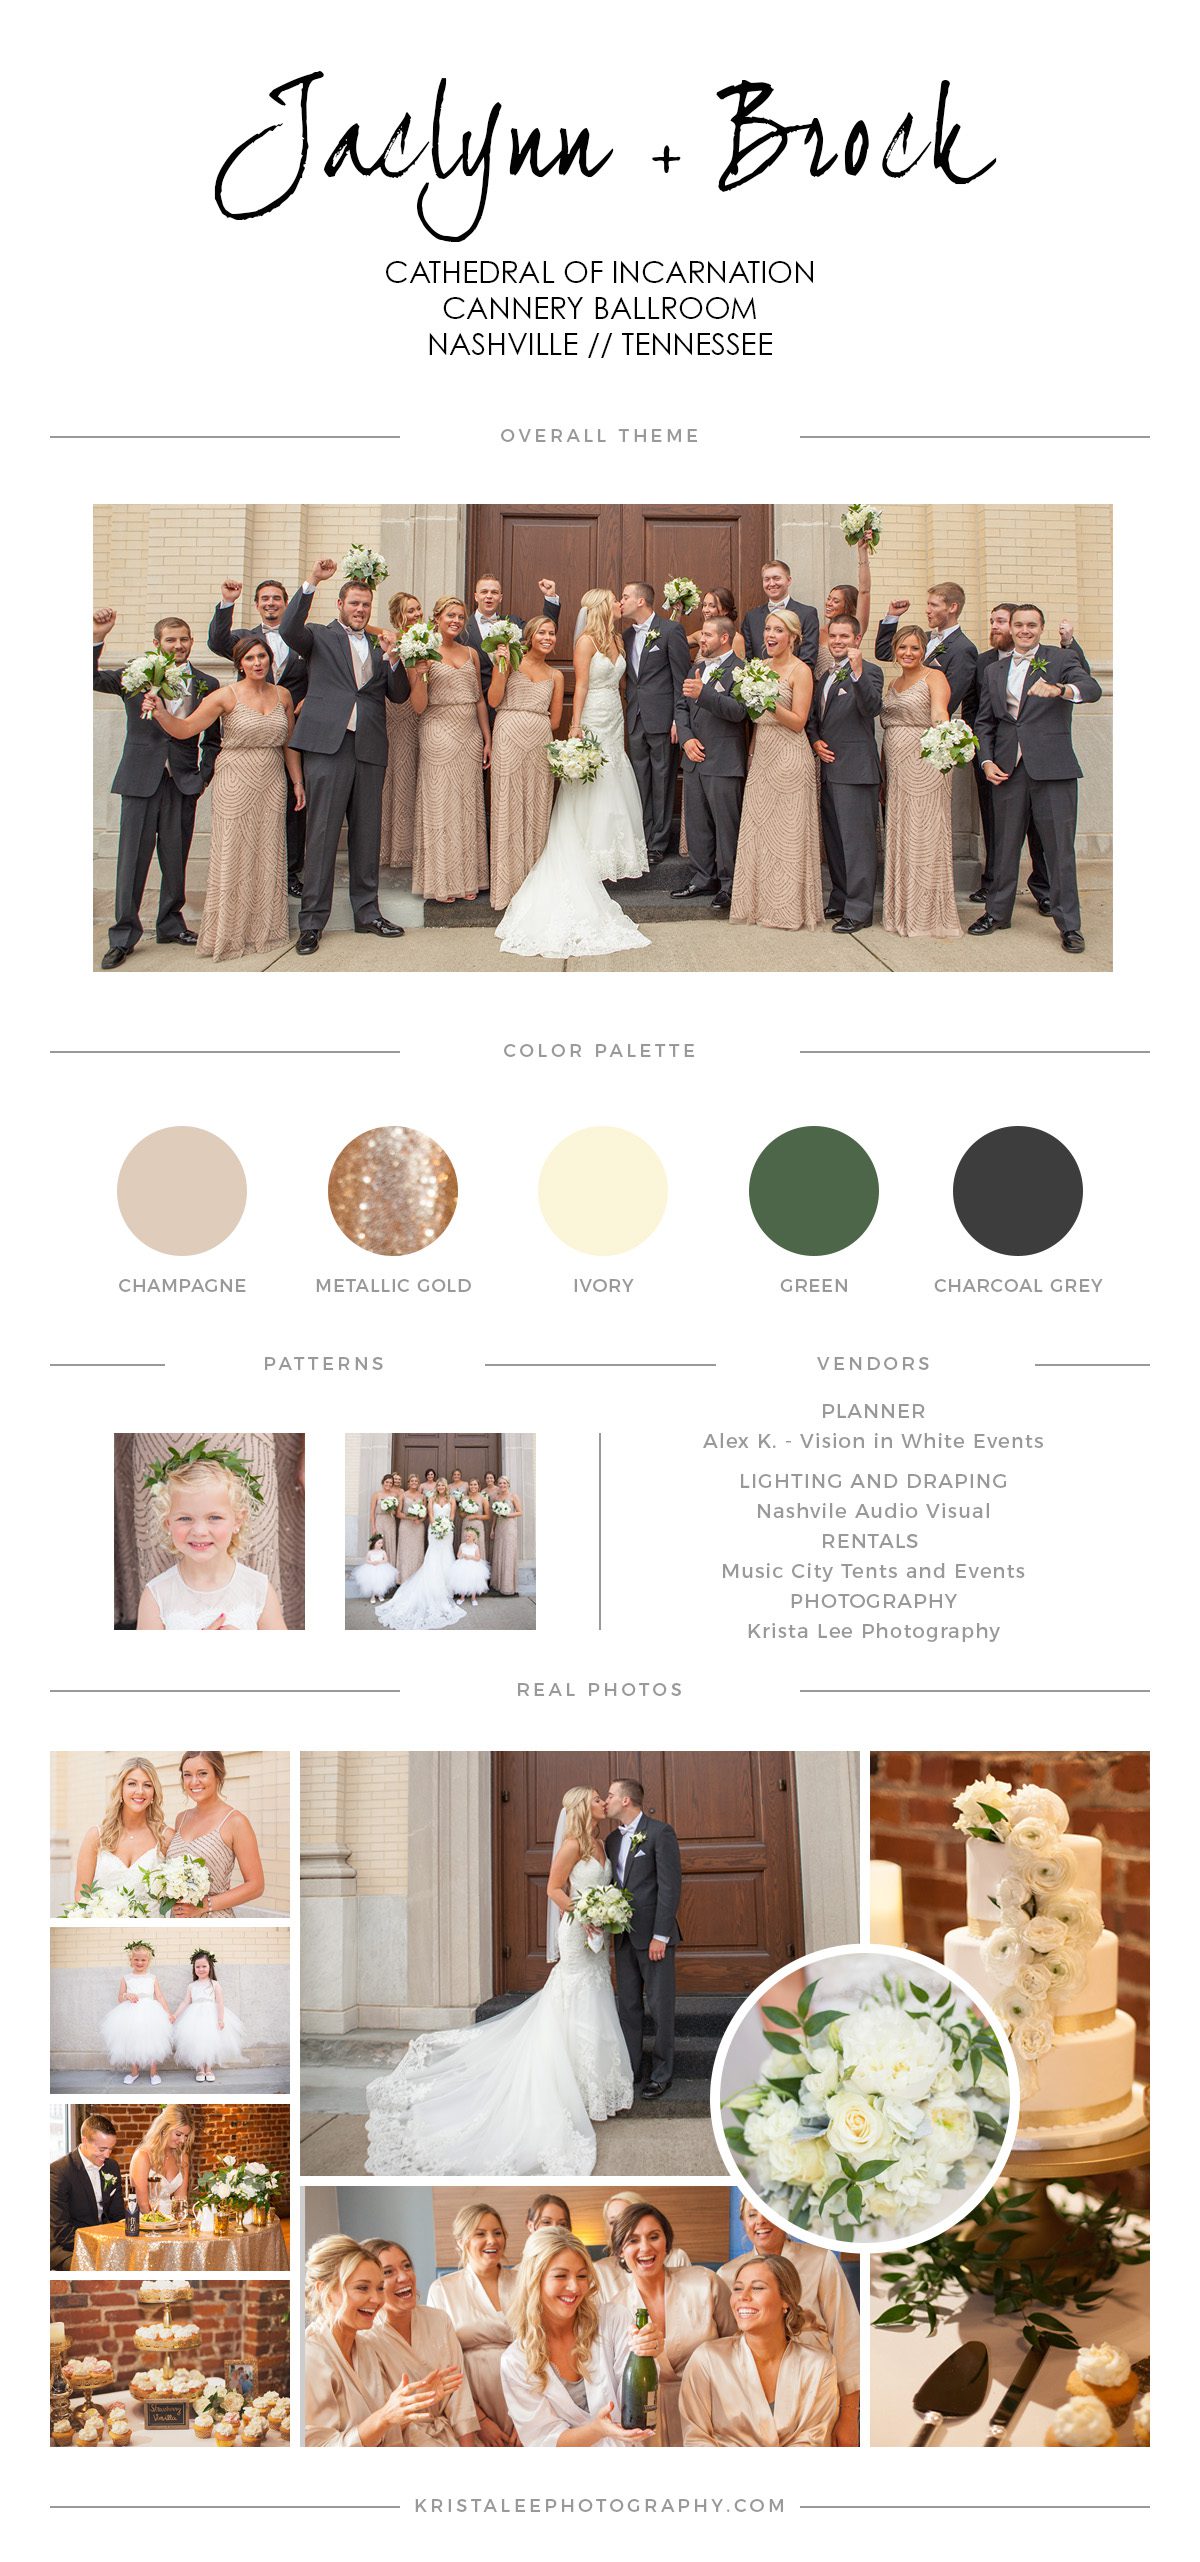 cathedral of incarnation wedding and cannery ballroom reception collage of wedding colors and details